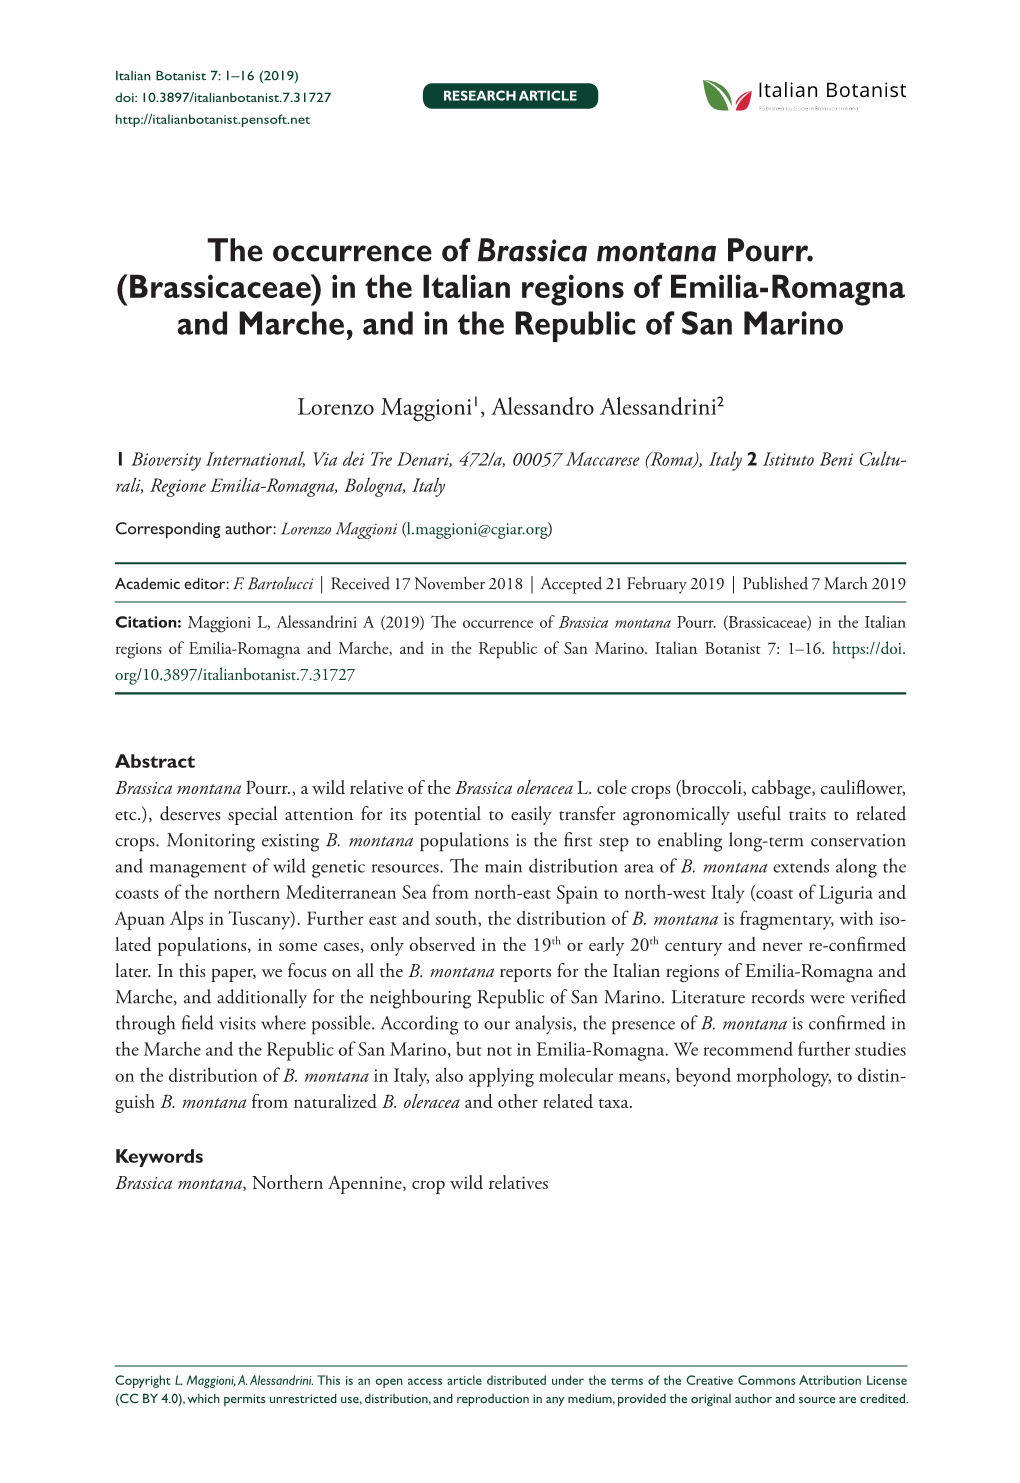 The Occurrence of Brassica Montana Pourr. (Brassicaceae) in the Italian Regions of Emilia-Romagna and Marche, and in the Republic of San Marino